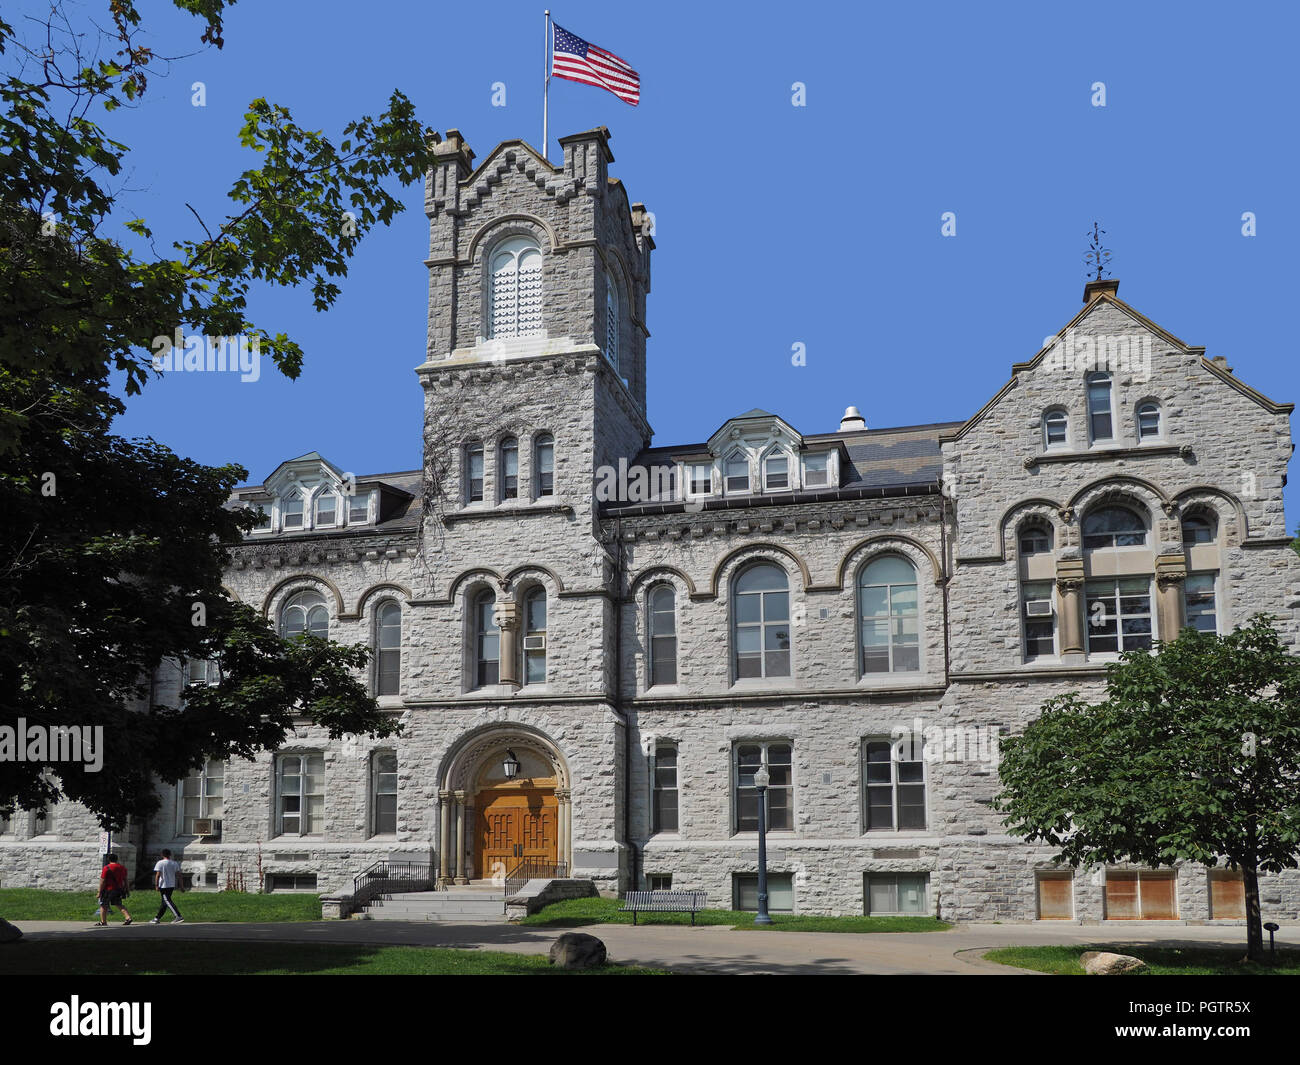 Old stone ivy league style college building Stock Photo